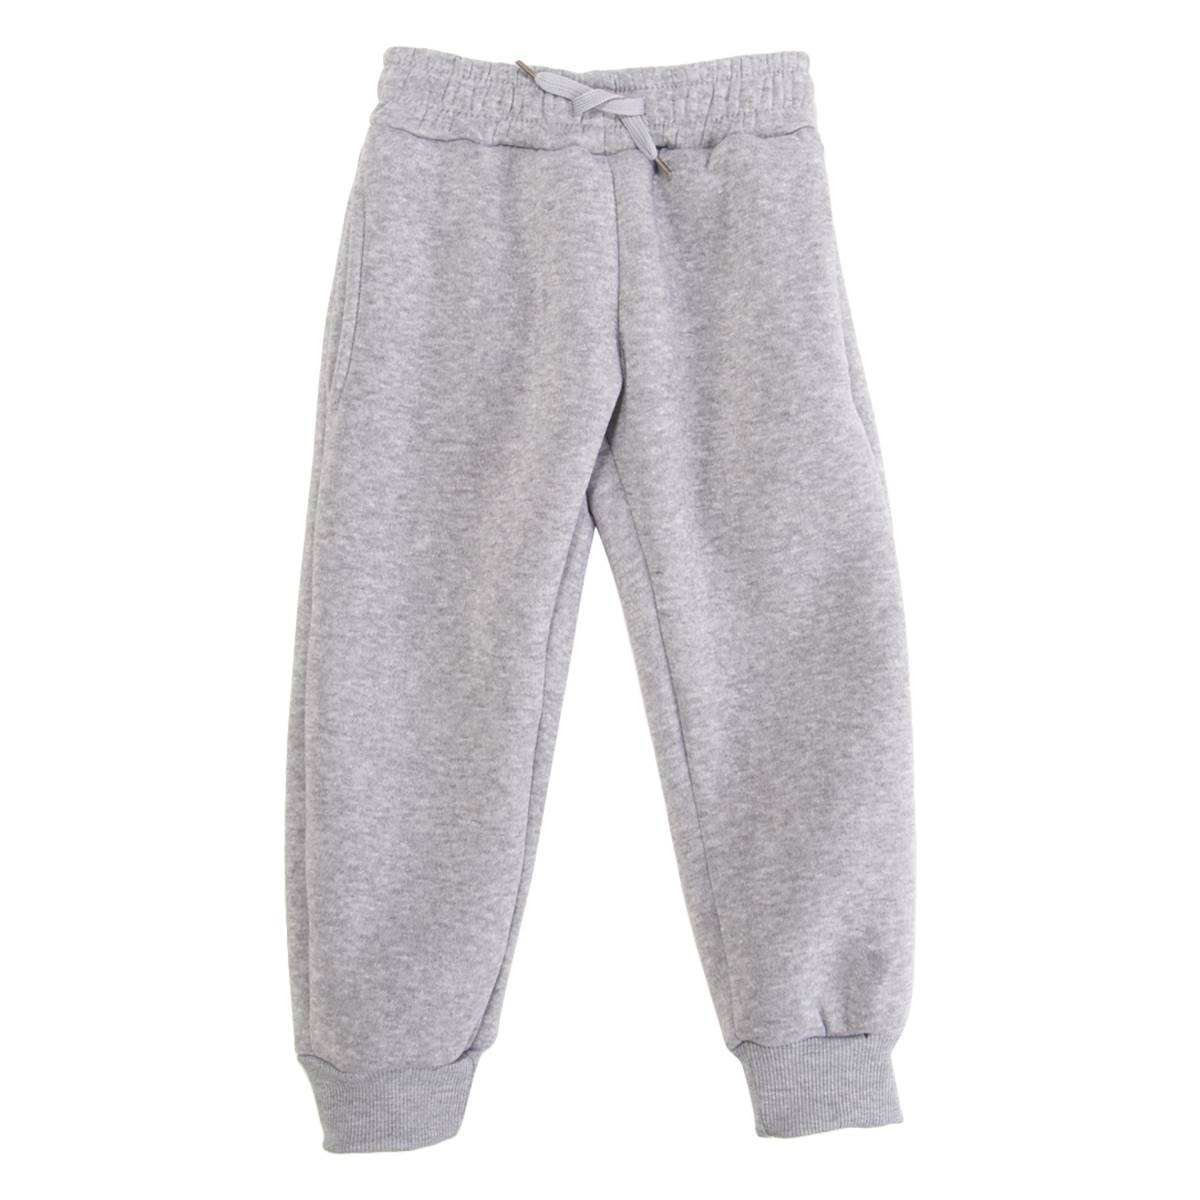 Boys (4-7) Cougar(R) Sherpa Lined Joggers